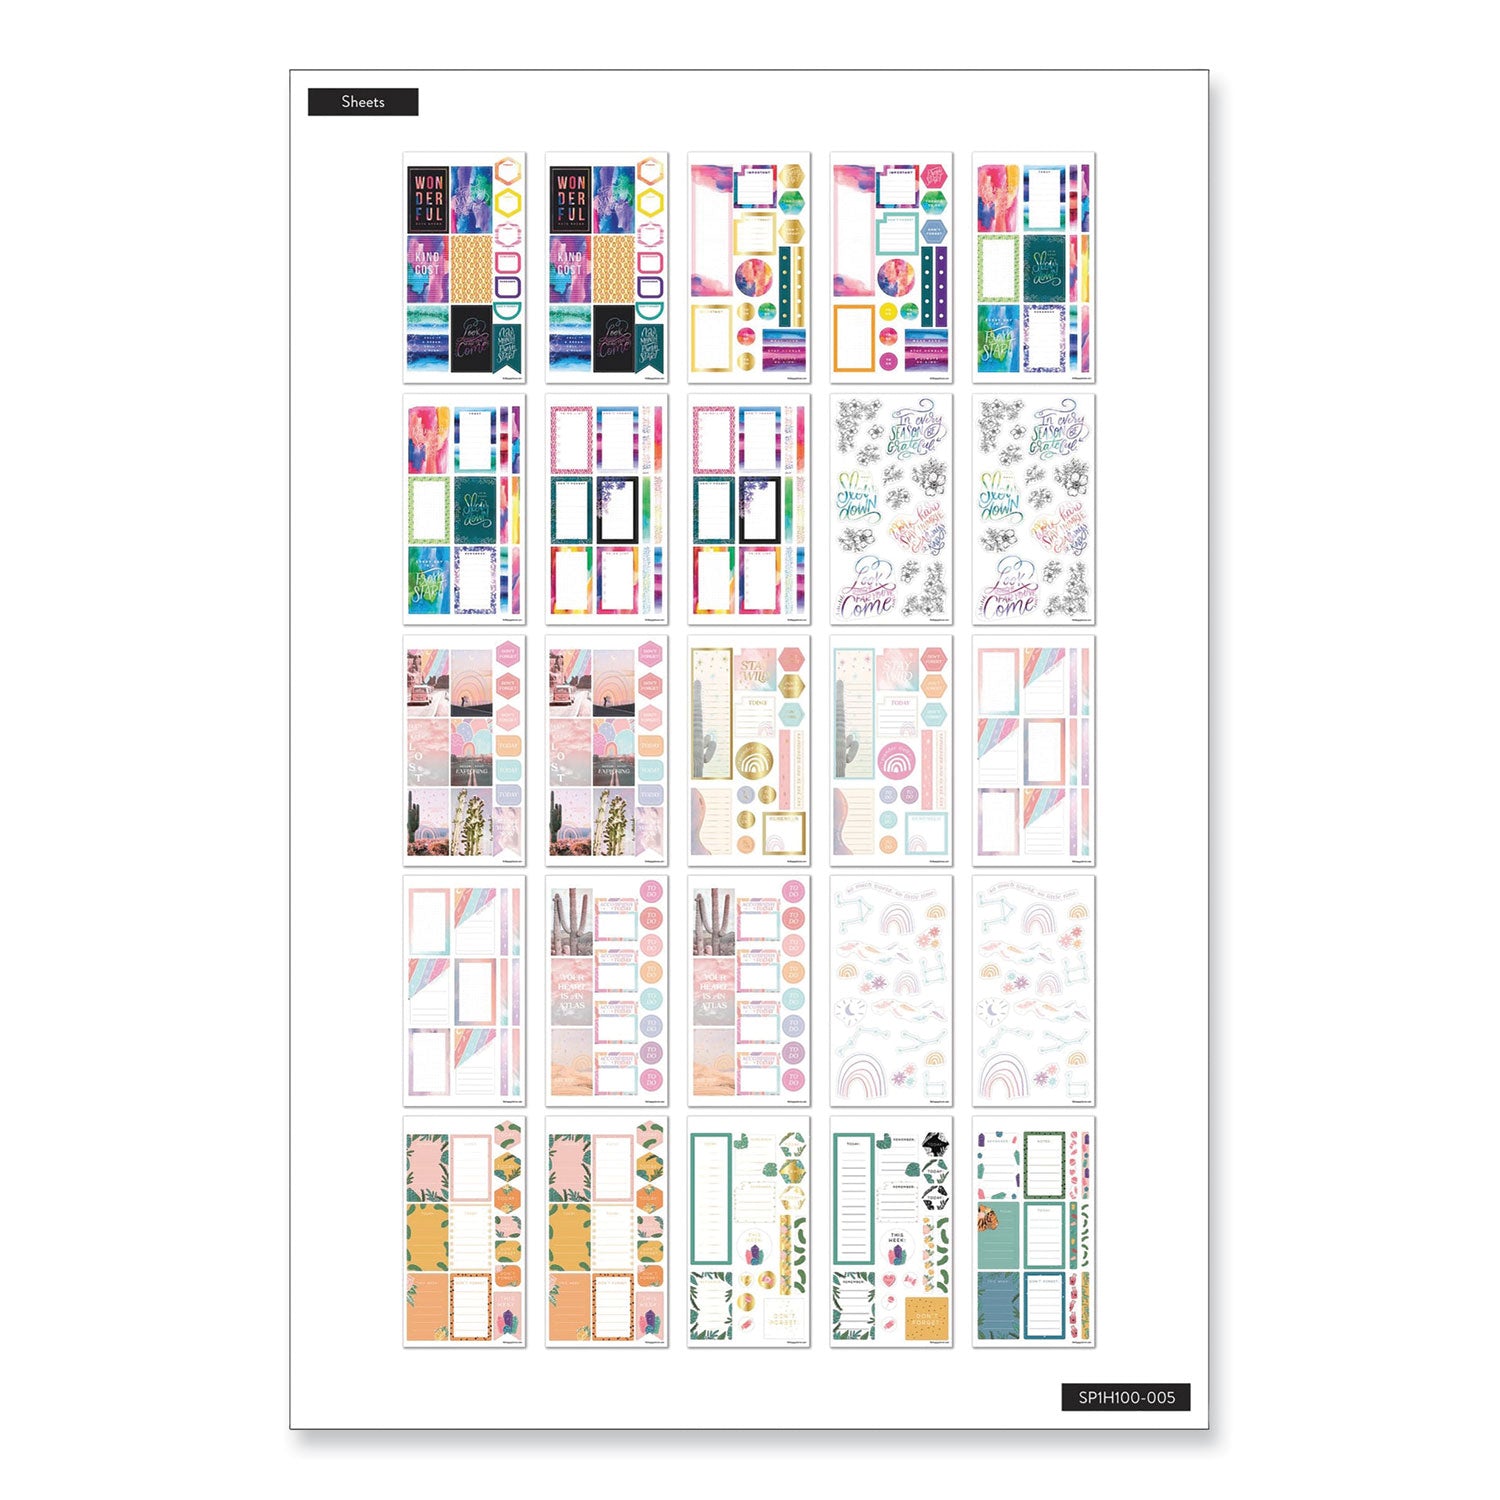 all-the-essentials-mega-value-pack-stickers-productivity-theme-2172-stickers_thlsp1h100005 - 4